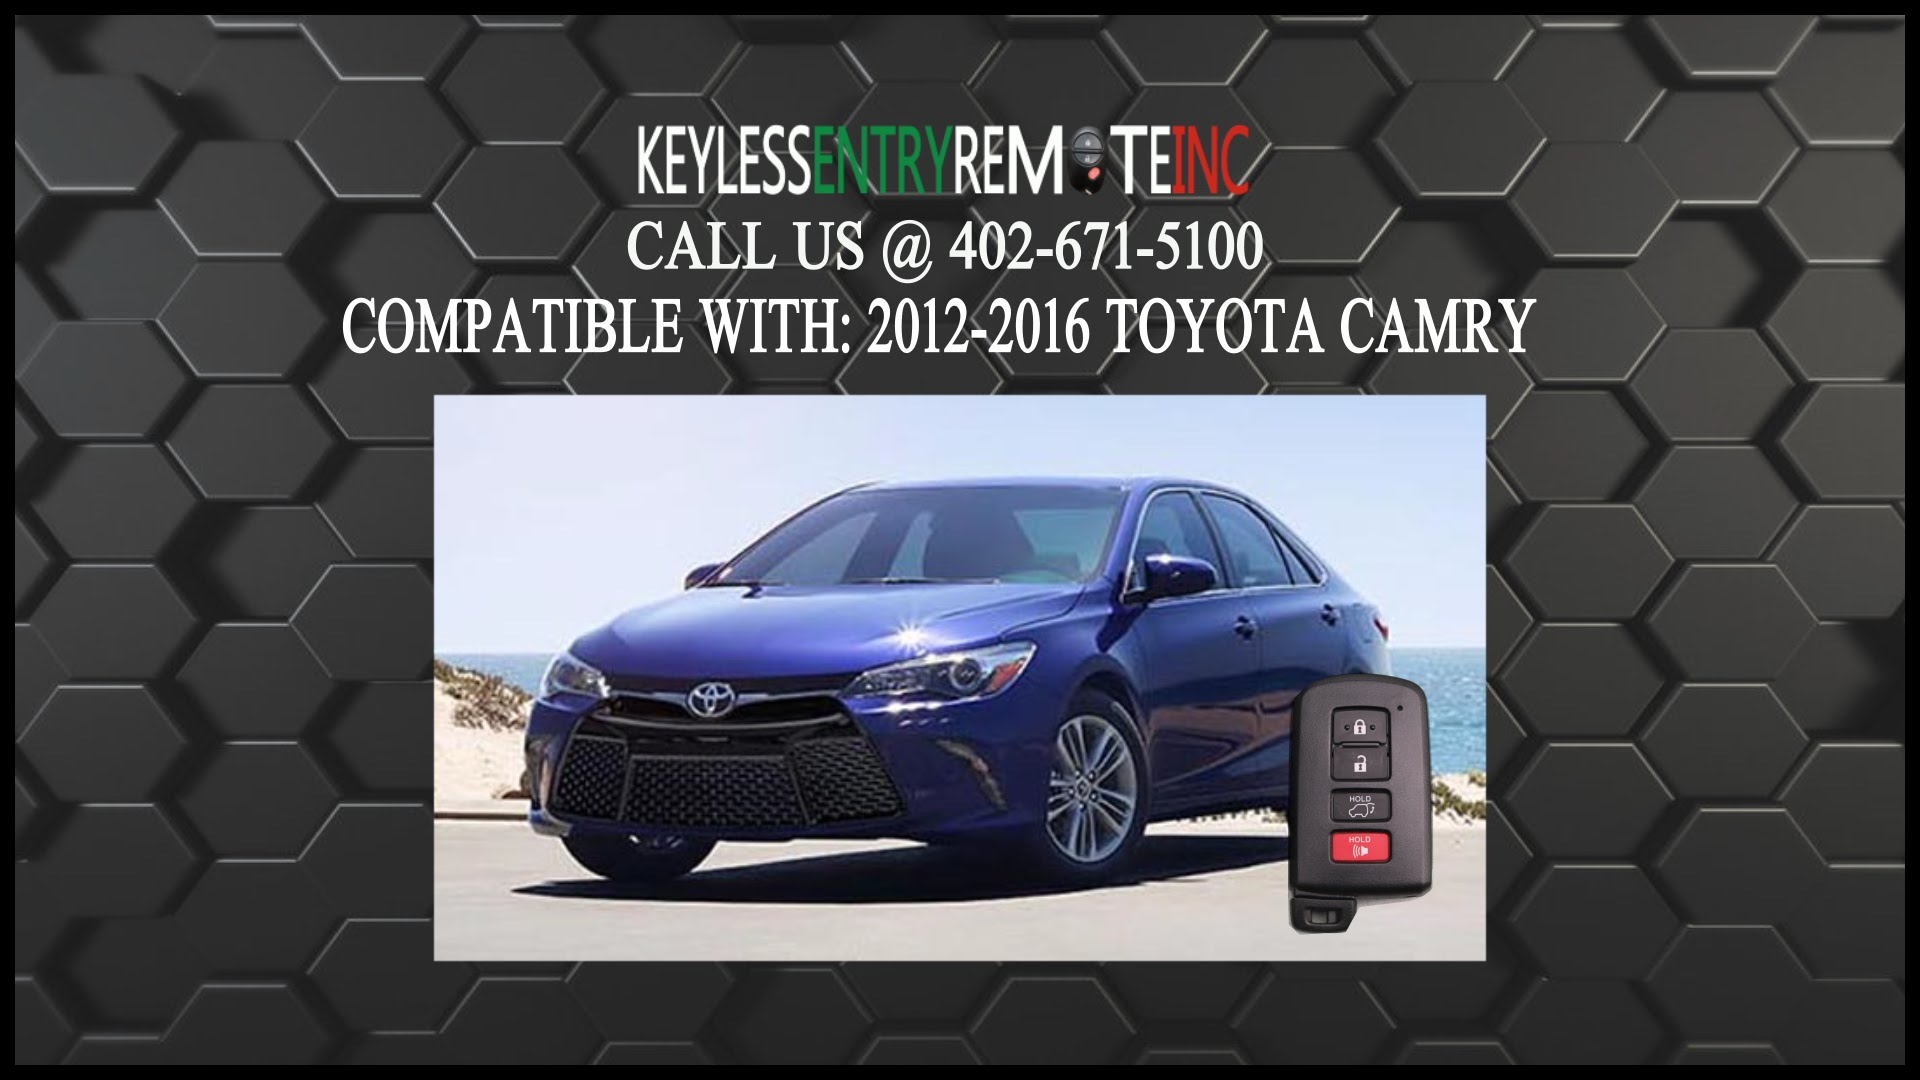 How To Replace Toyota Camry Key Fob Battery 2012 2013 2014 2015 2016